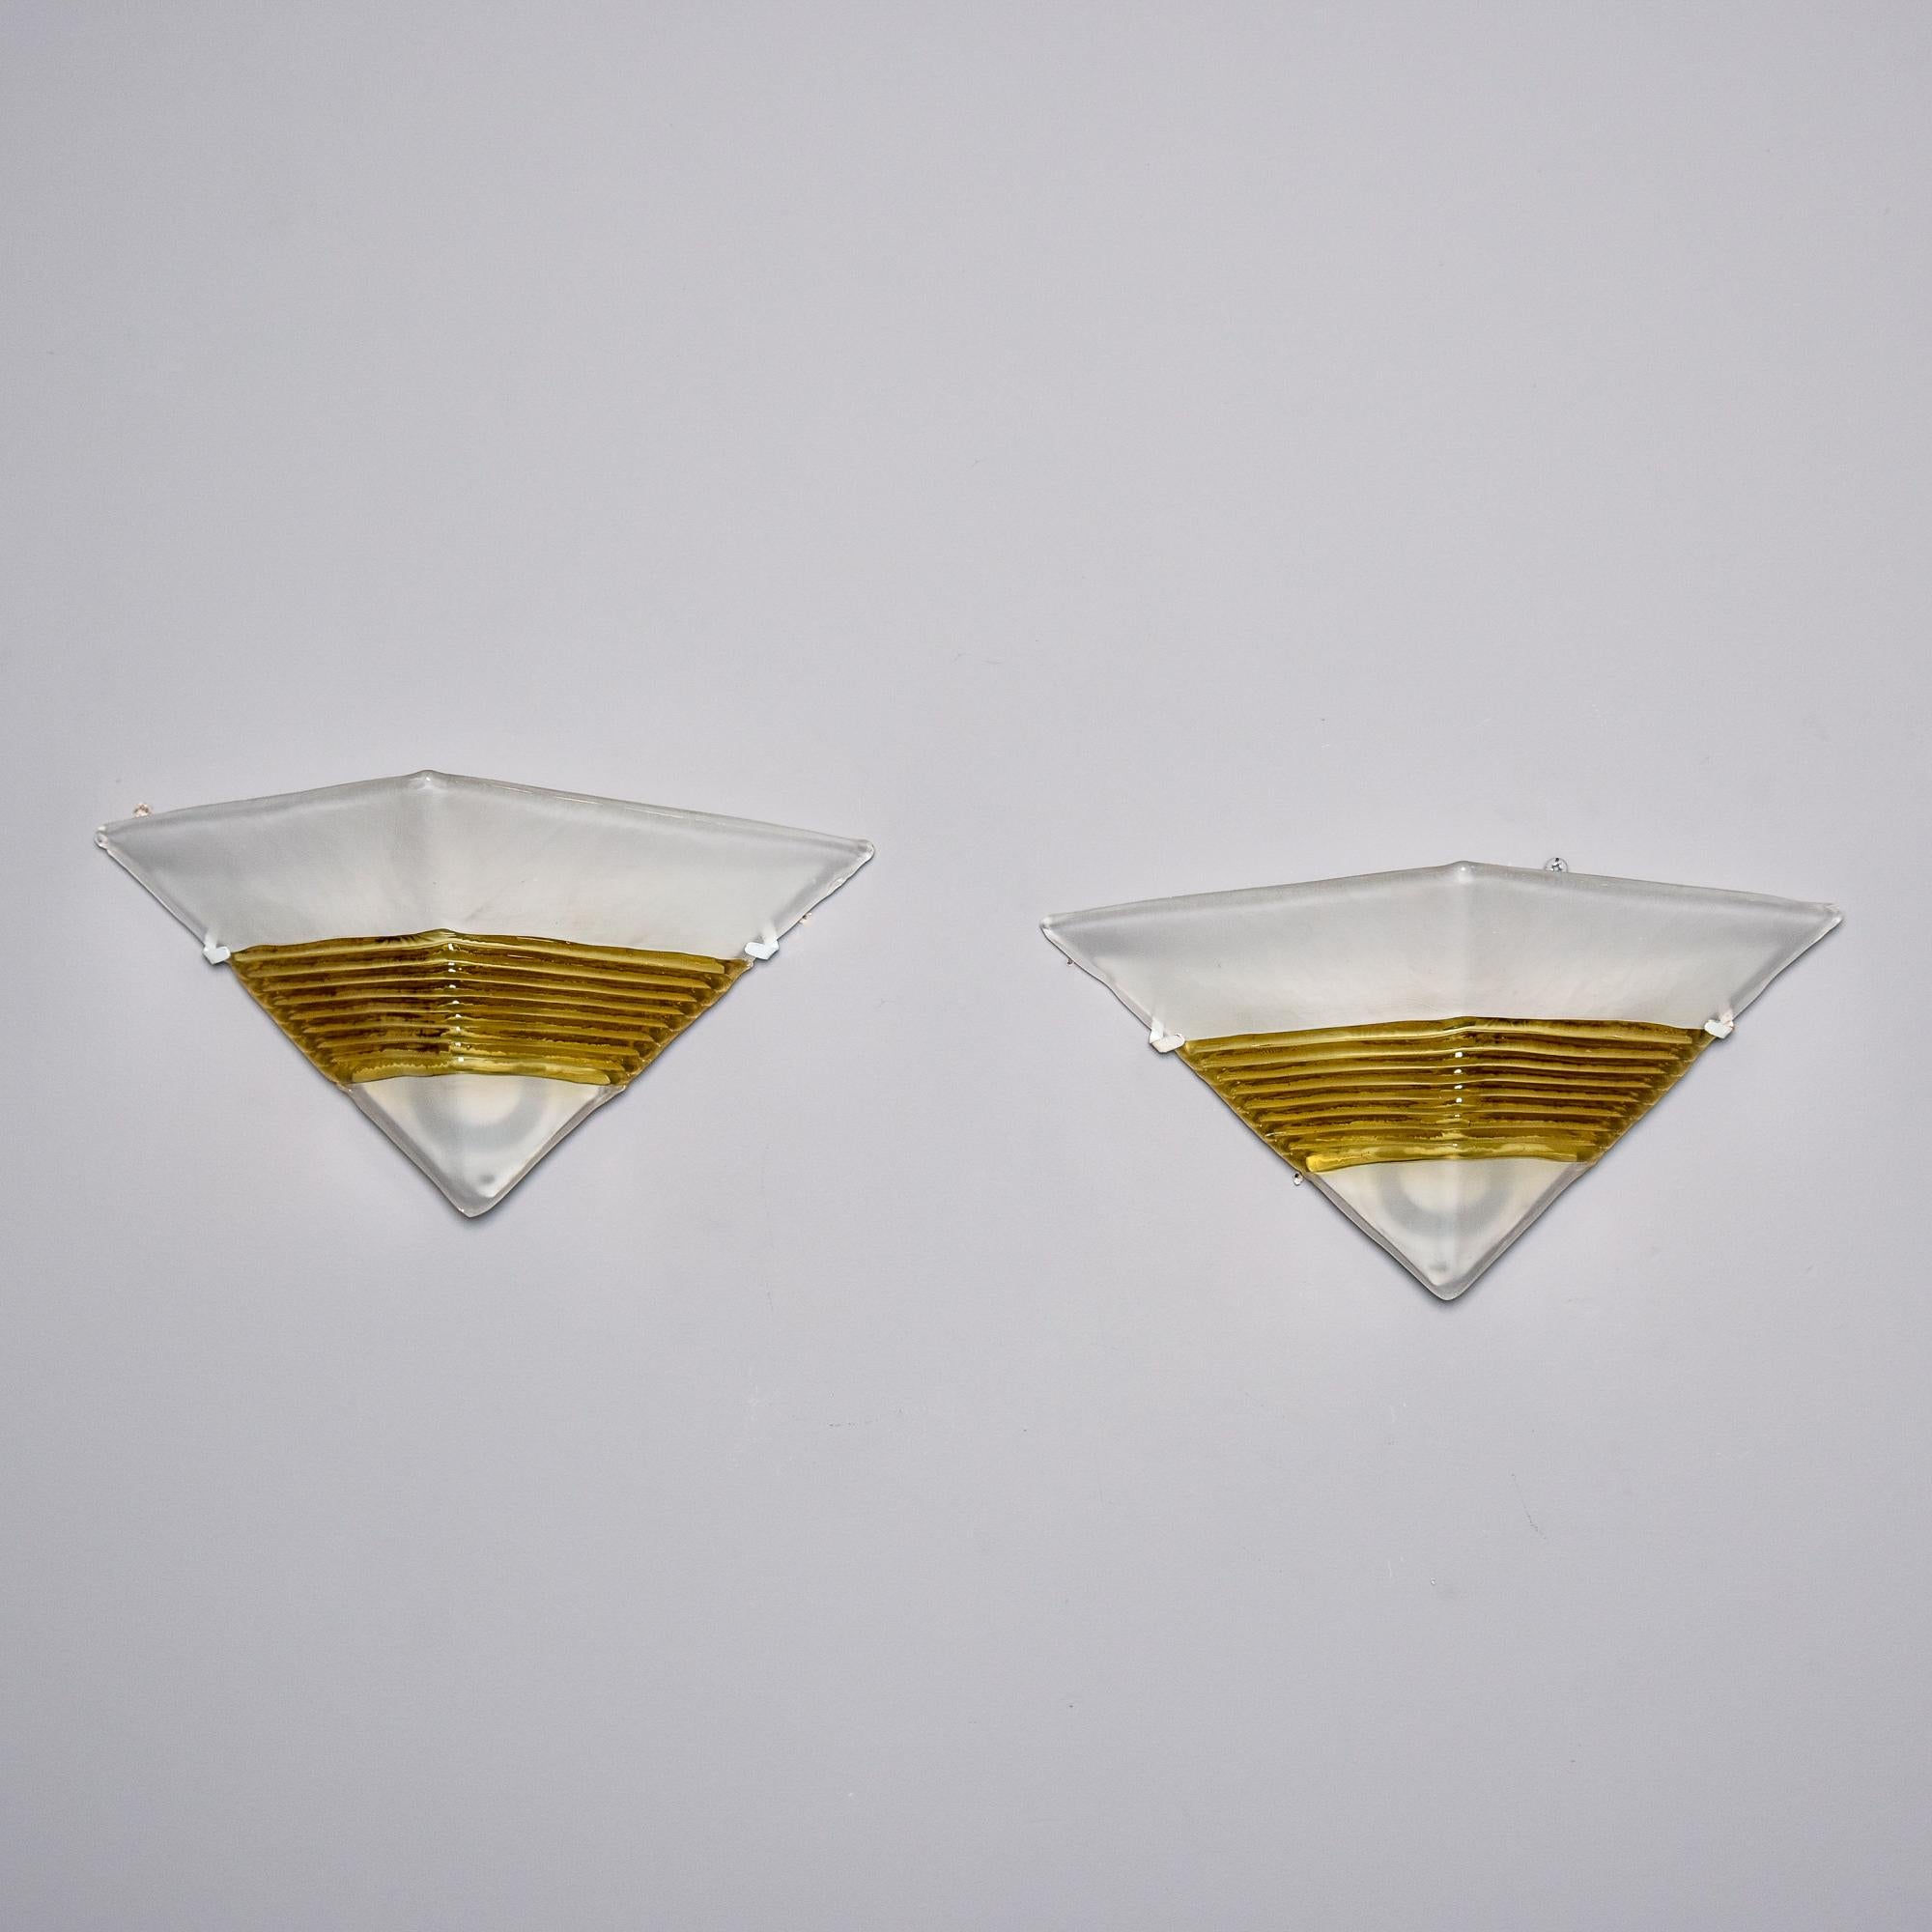 Circa 1990s pair of Murano glass sconces by AV Mazzega. Each thick, nearly opaque white triangular glass shade is accented with a ridged, gold band. Shades are held in place flush against the wall and cover a single, standard-sized socket. Wiring